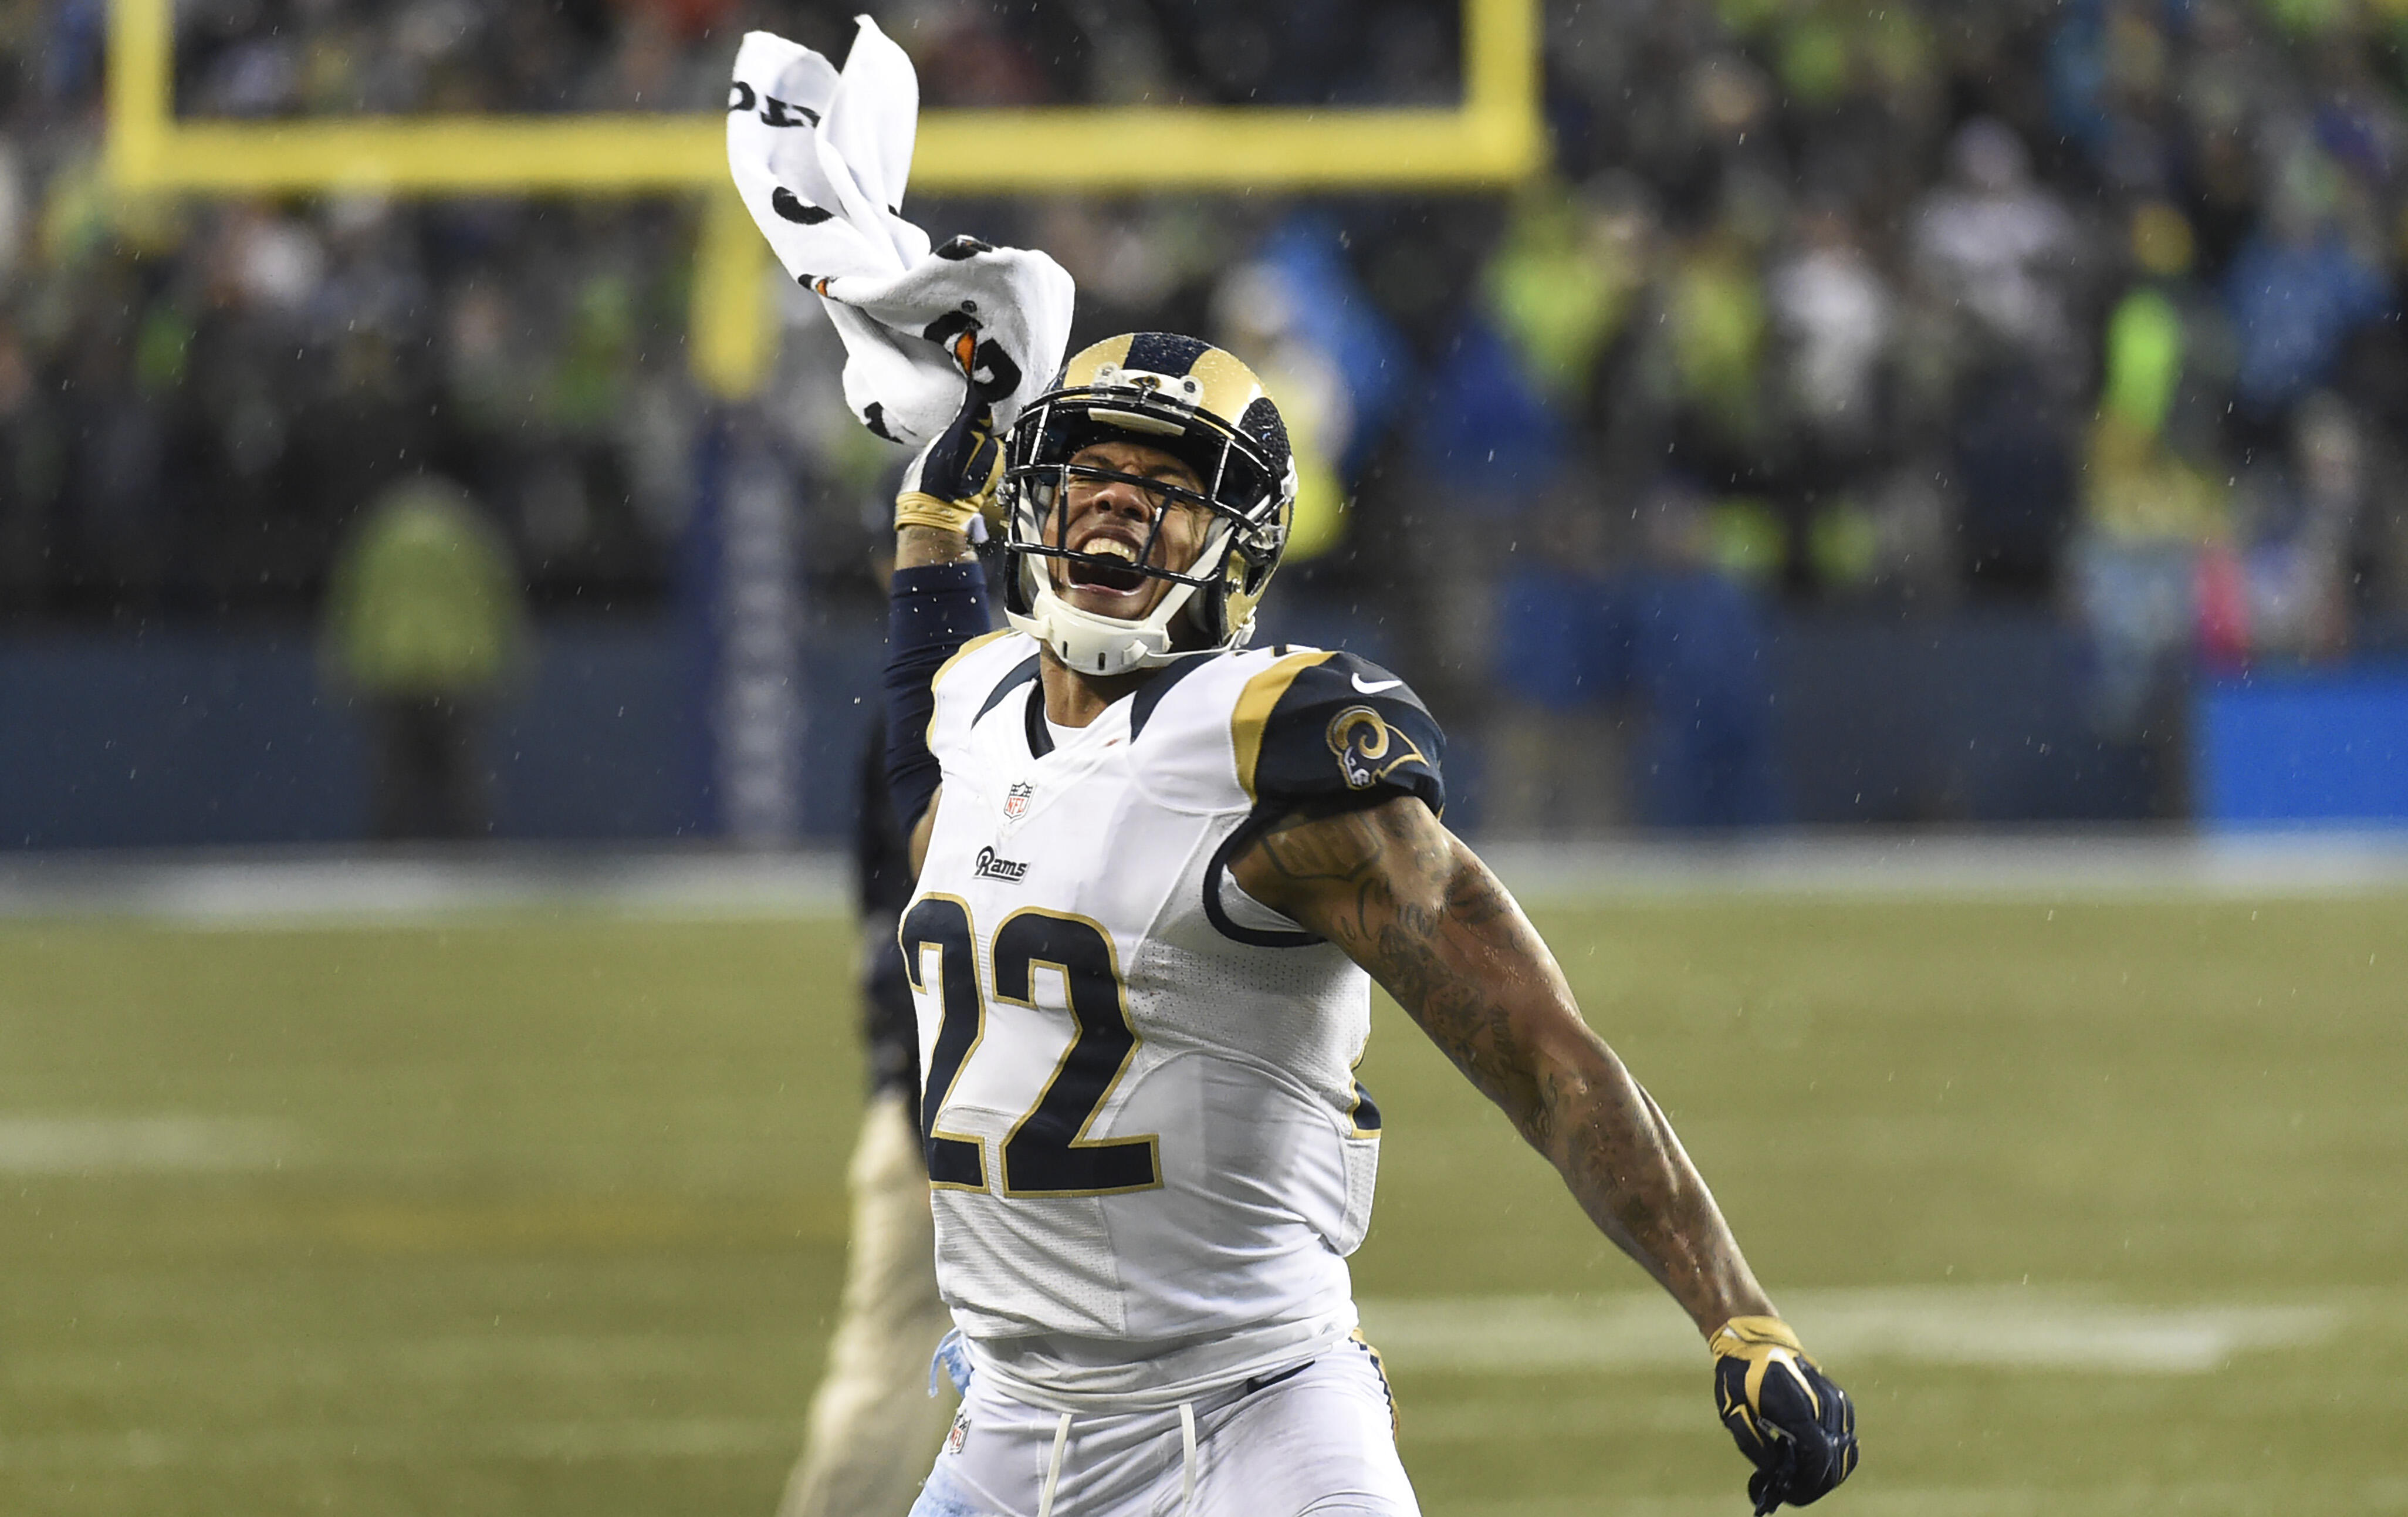 SEATTLE, WA - DECEMBER 27: Cornerback Trumaine Johnson #22 of the St. Louis Rams celebrates after the Rams recovered a fumble during the fourth quarter of the game against the Seattle Seahawks at CenturyLink Field on December 27, 2015 in Seattle, Washingt